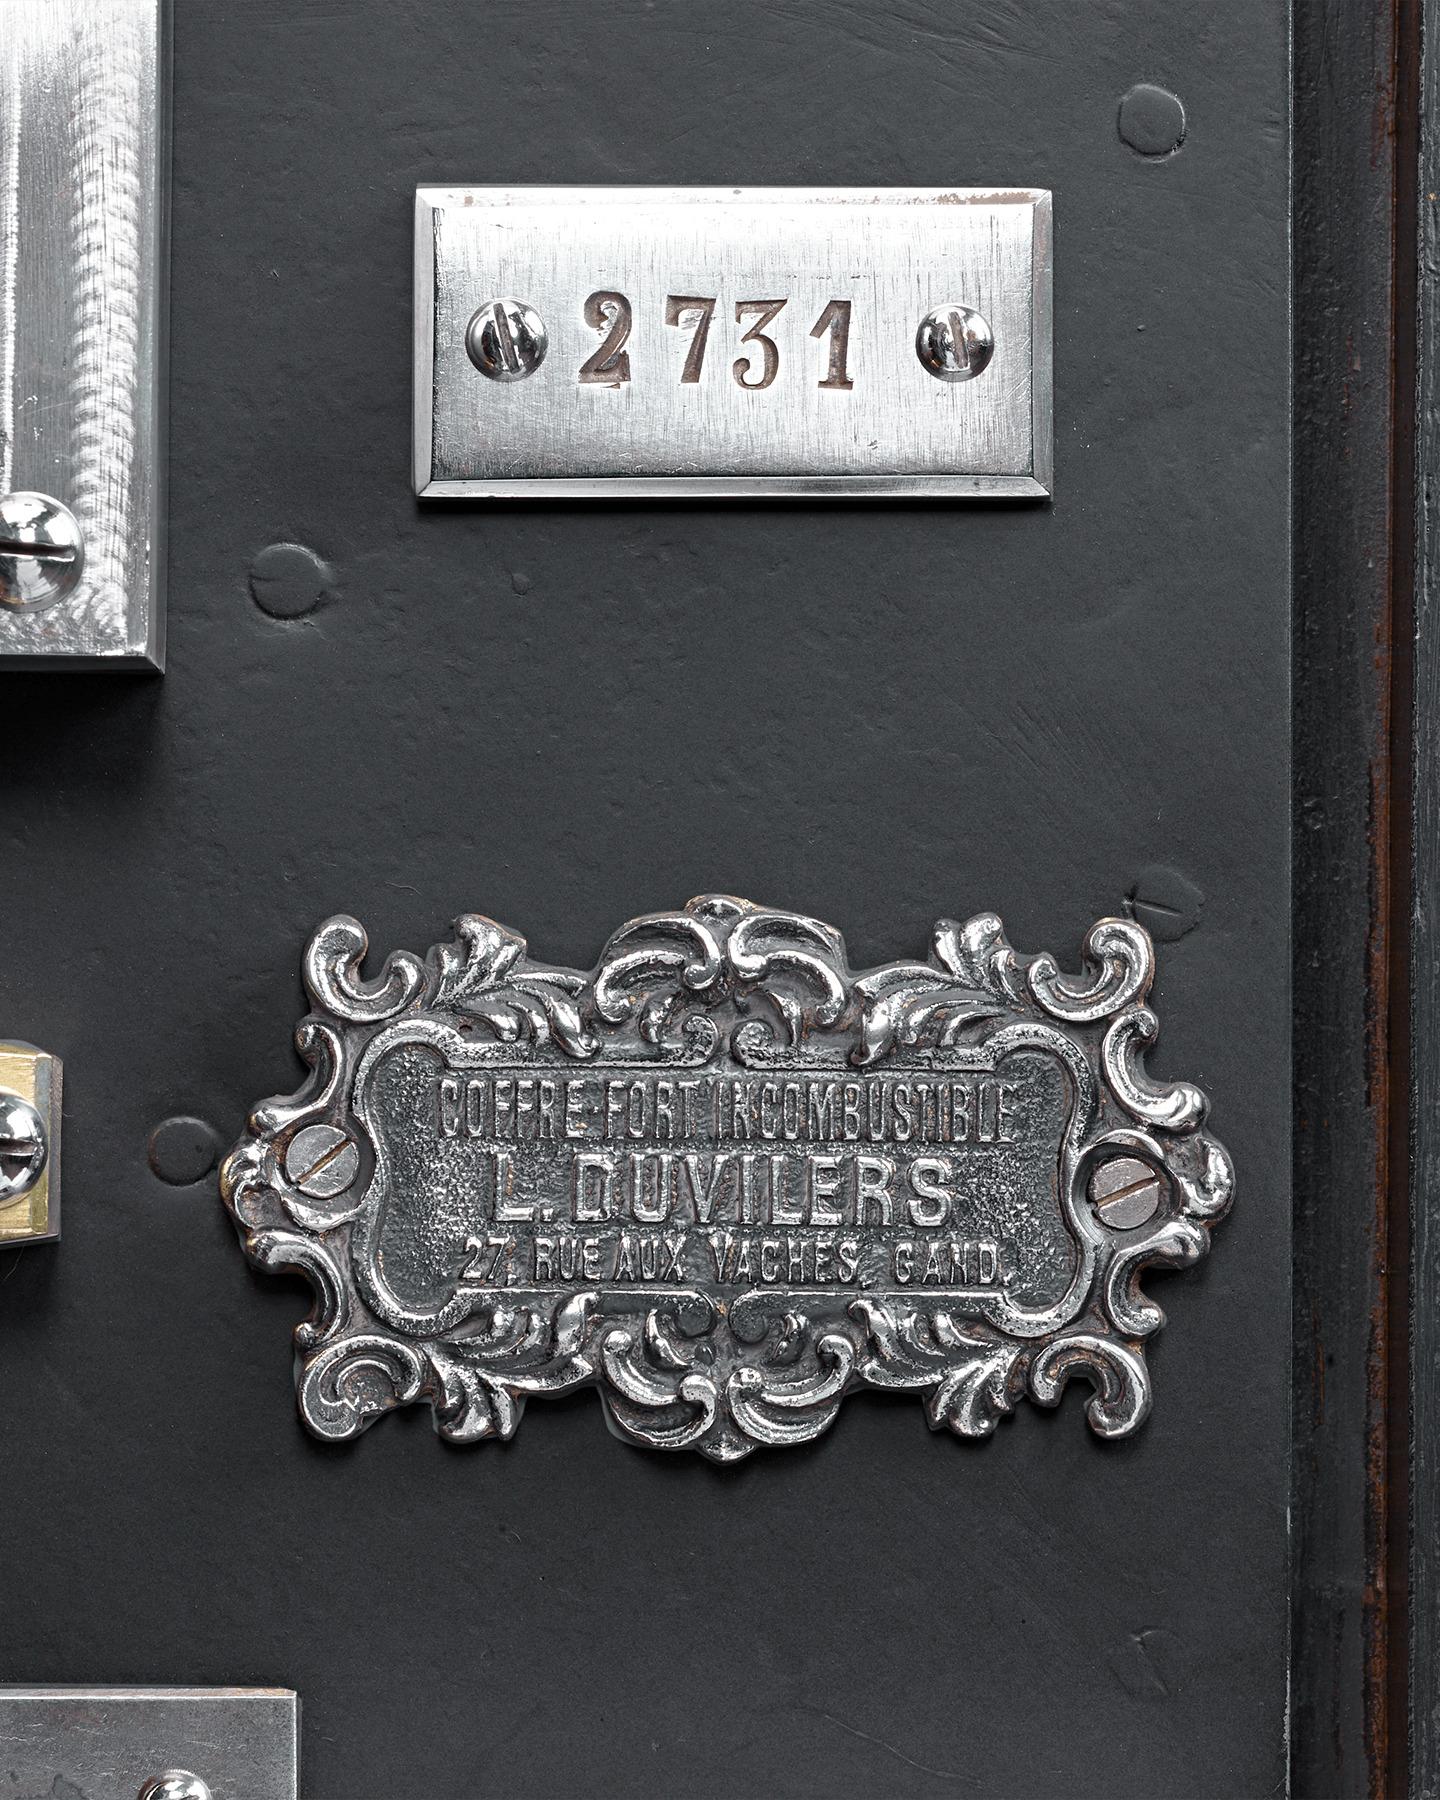 Belgian Iron Combination Safe by L. Duvilers 2